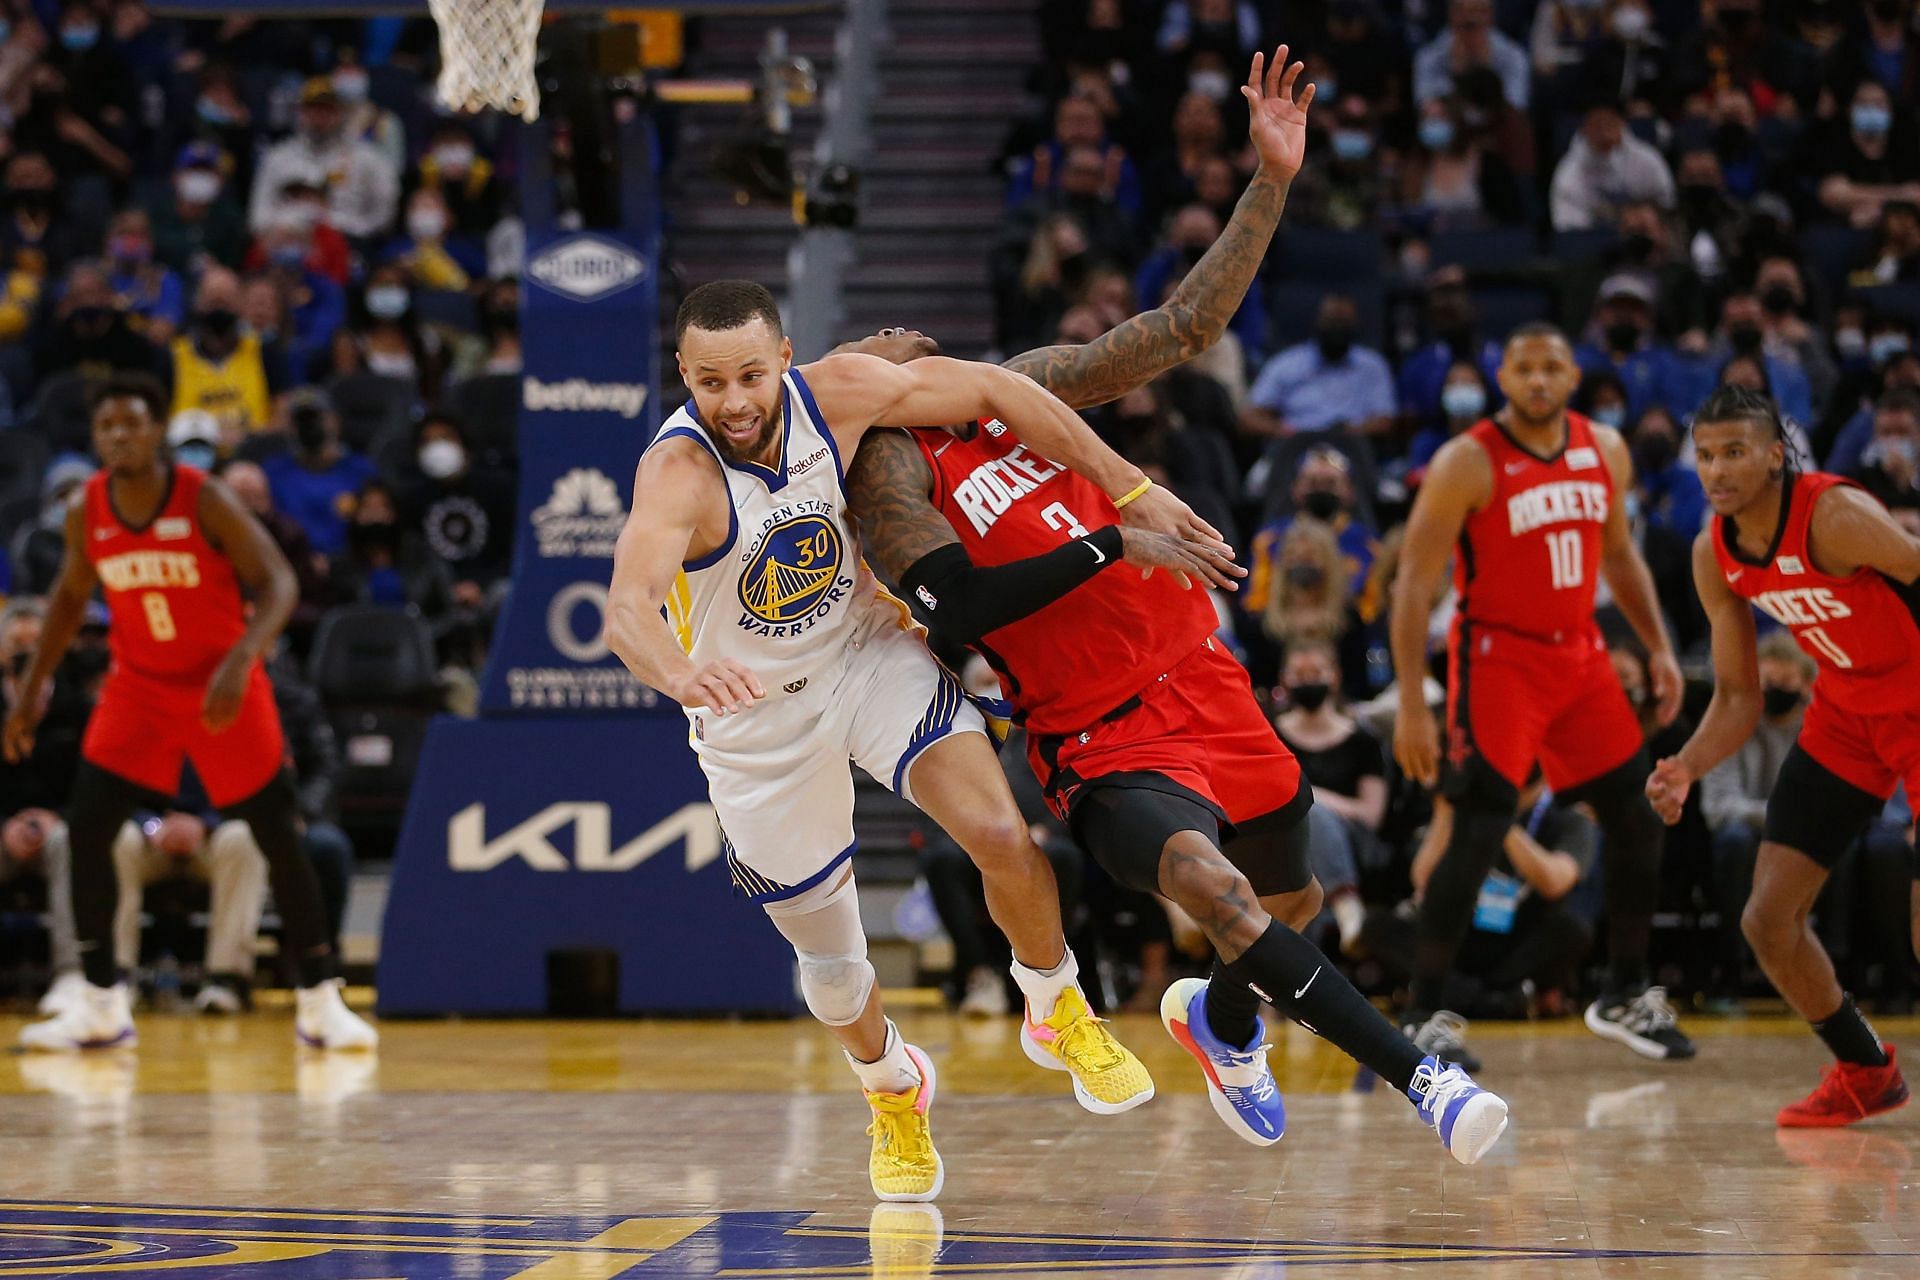 Steph Curry of the Golden State Warriors vs the Houston Rockets.